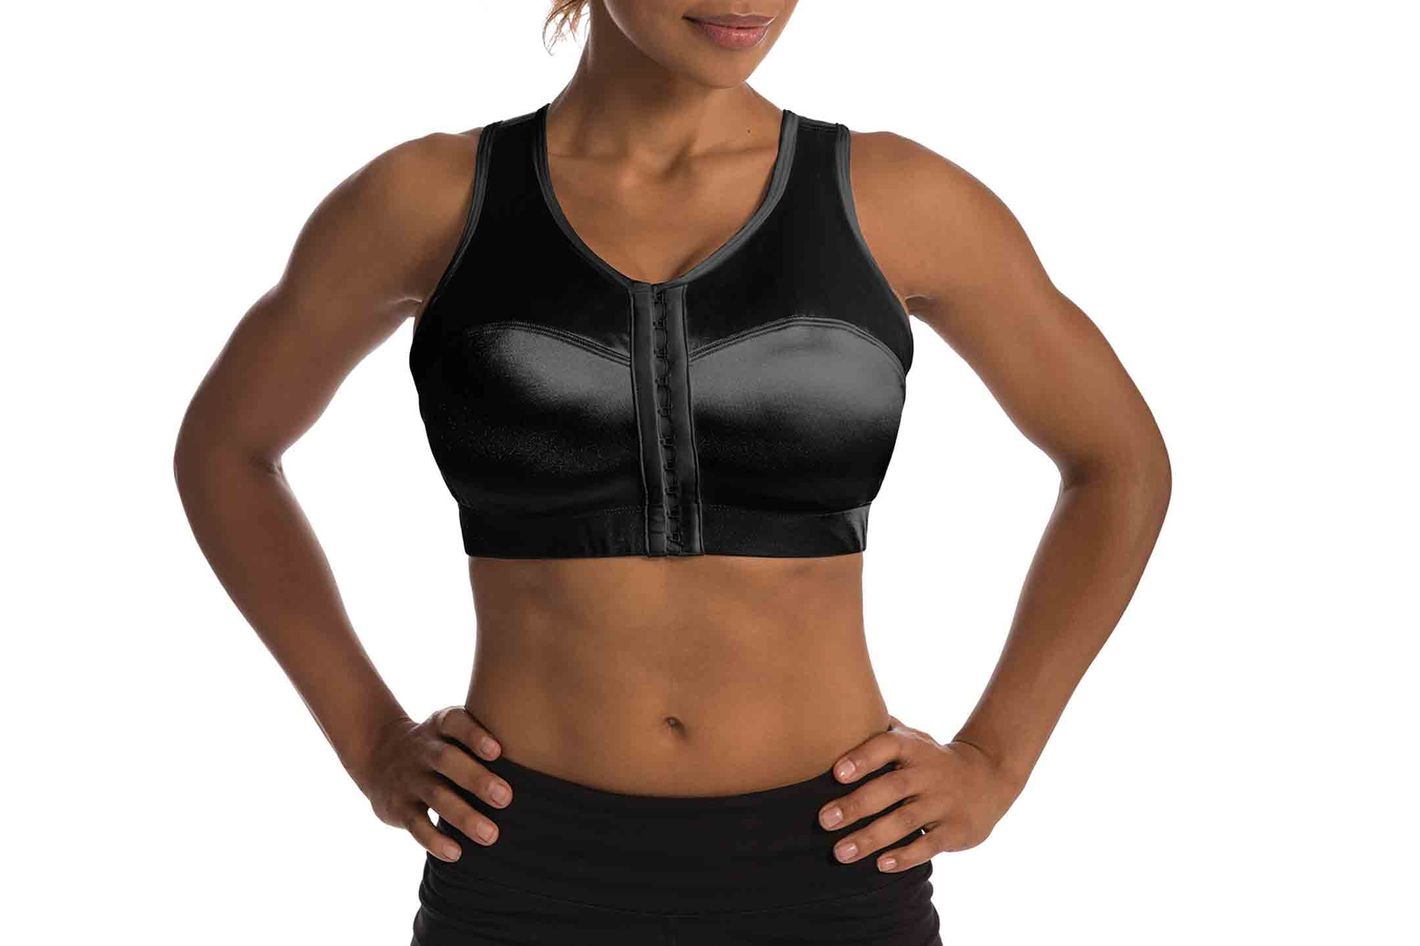 The 8 Best Sports Bras for Large Breasts